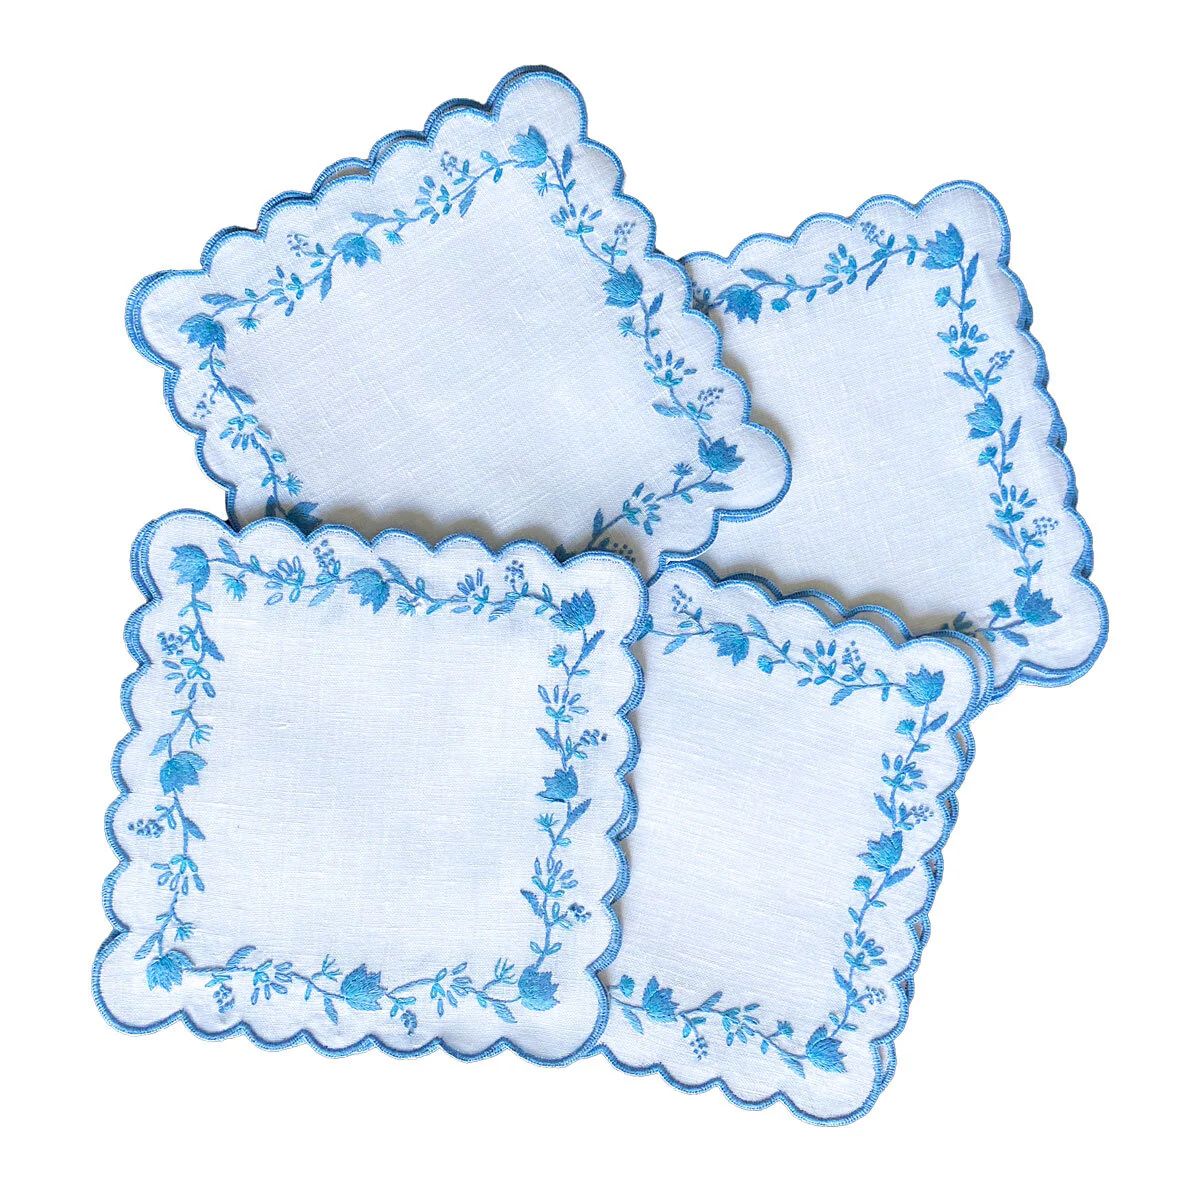 Hand Embroidered Scalloped Blue Floral Cocktail Napkins | Set of 4 | Christian Ladd Home